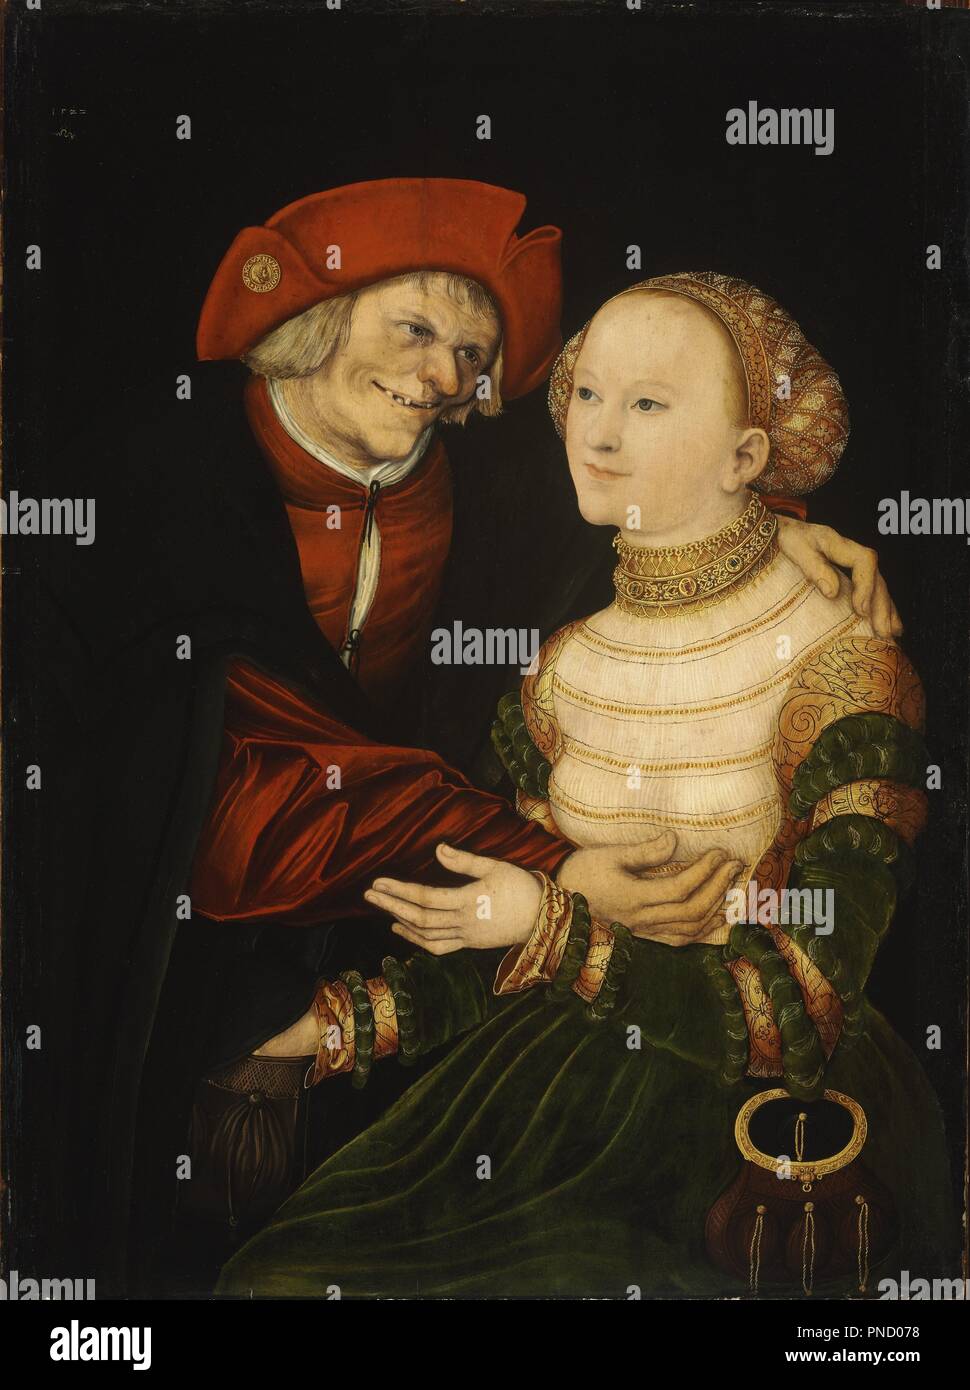 The Ill-Matched Couple / Old man and young woman. Date/Period: 1522. Oil on beech wood. Height: 84.5 cm (33.2 in); Width: 63 cm (24.8 in). Author: Cranach the Elder, Lucas. Cranach, Lucas, the Elder. Stock Photo